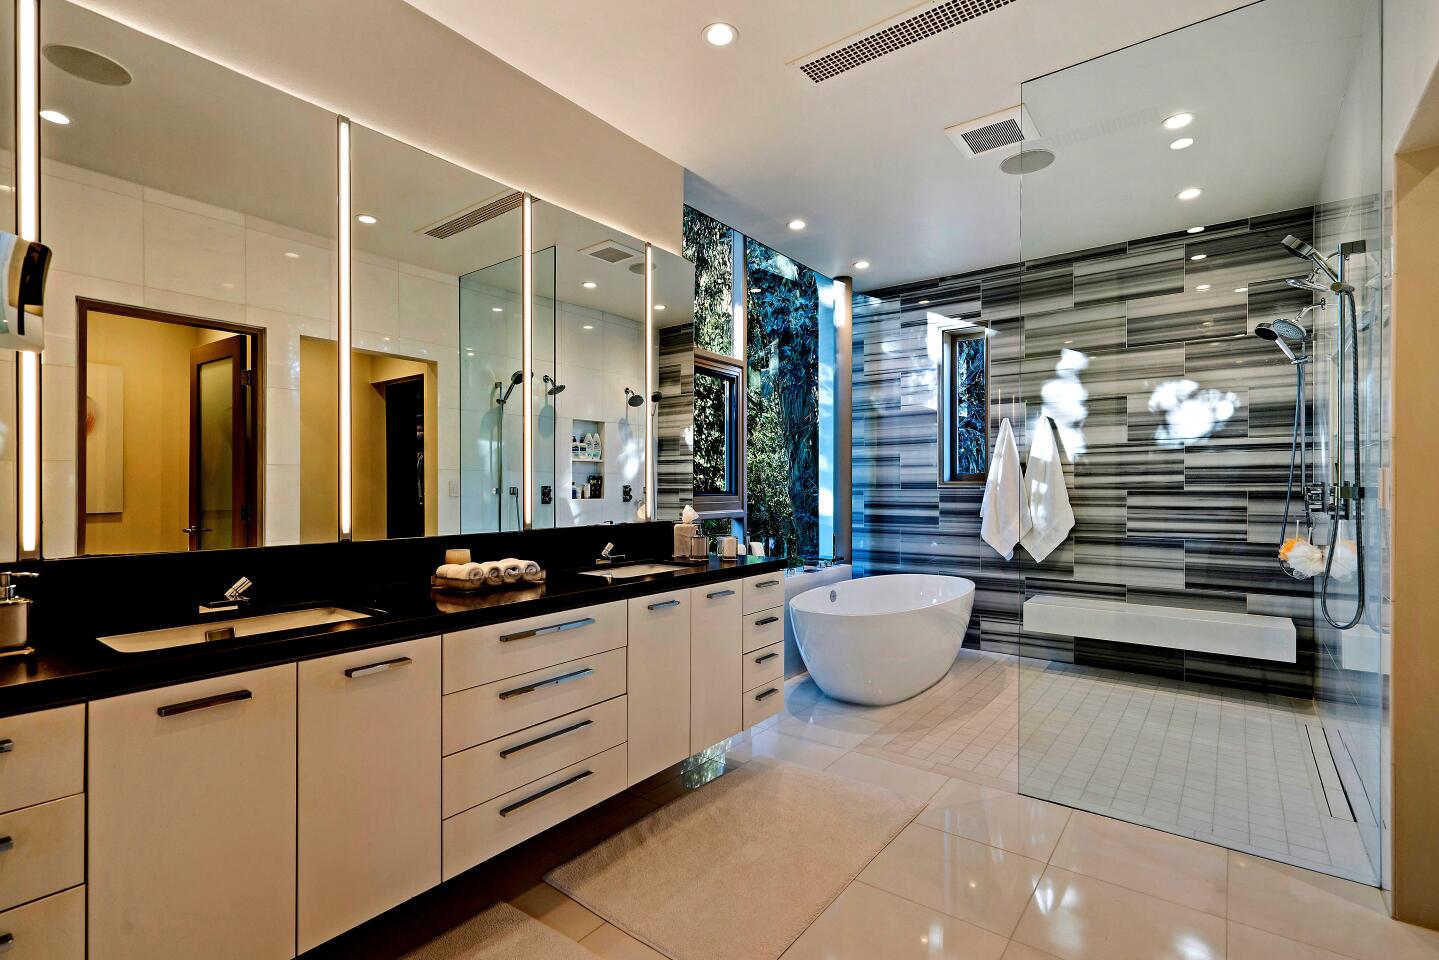 A large bathroom with sinks, a freestanding bathtub and a shower.